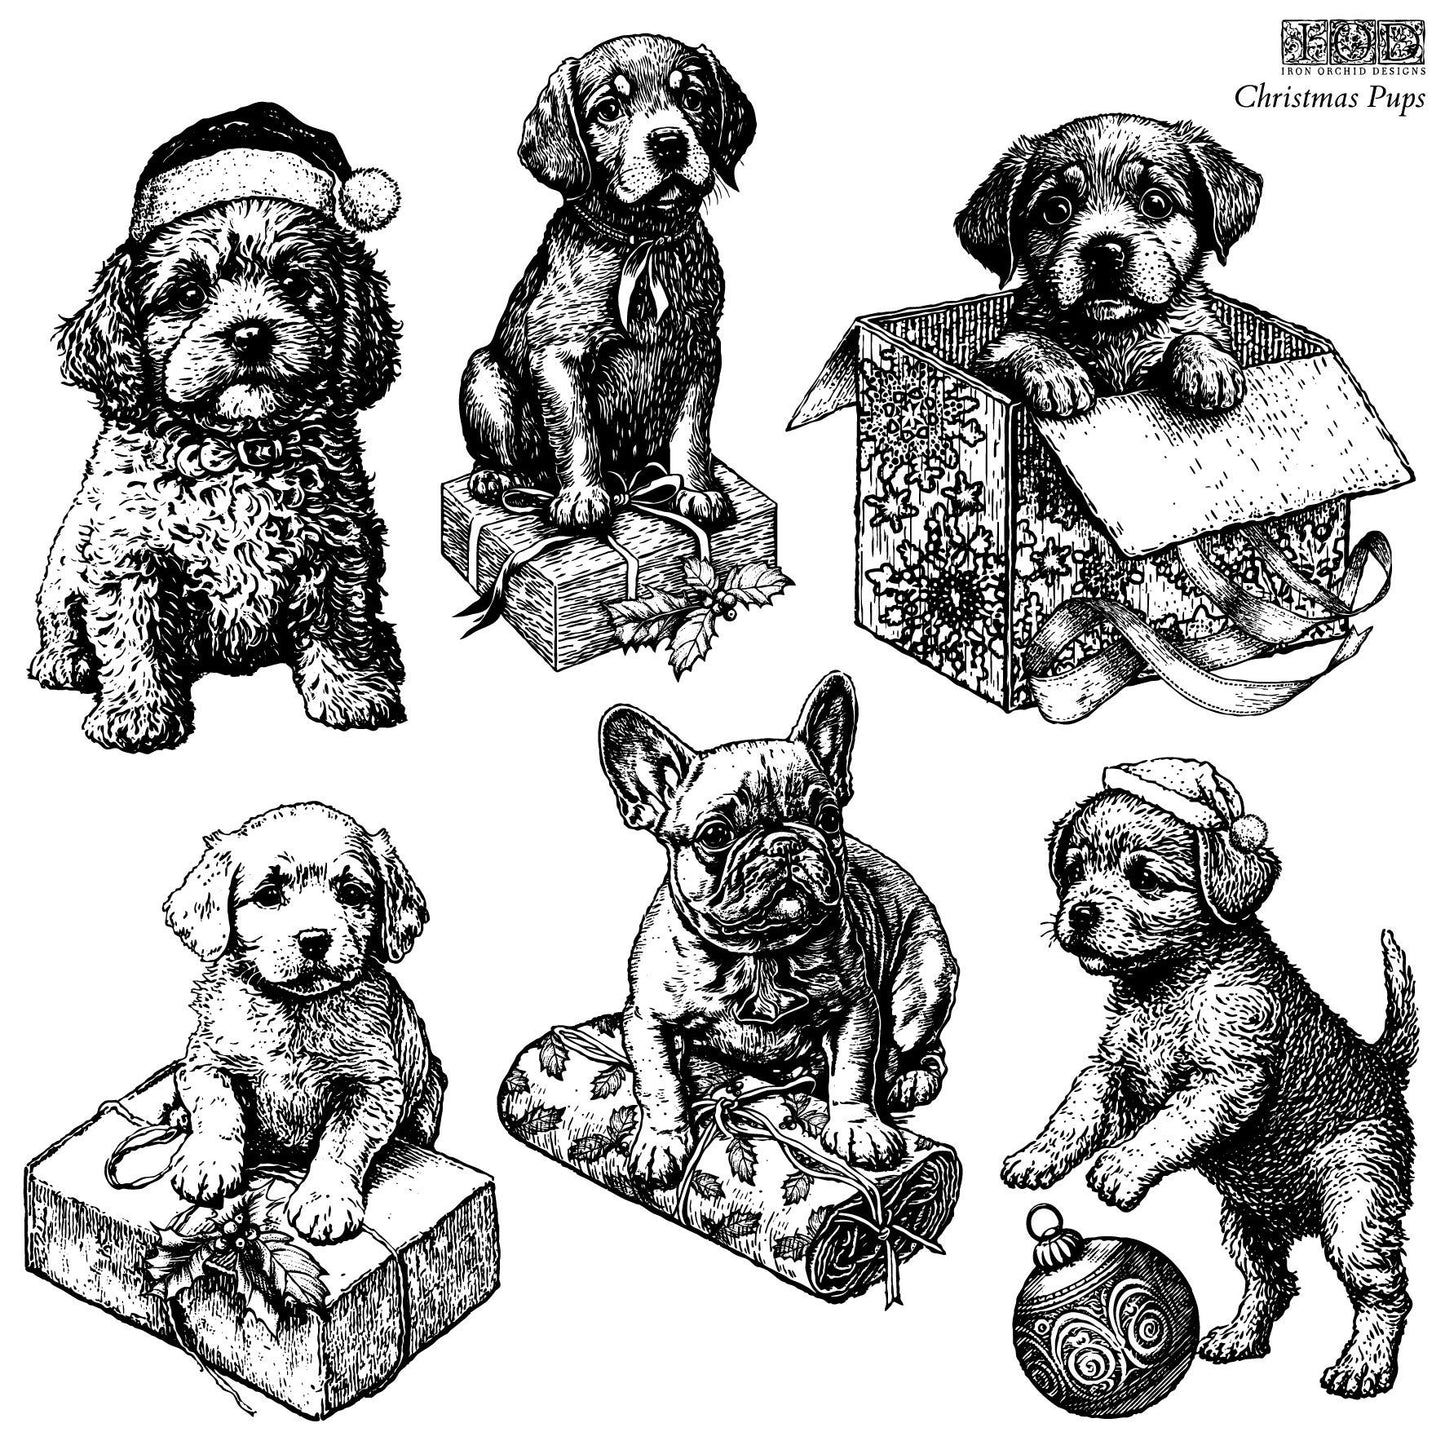 Christmas Puppies 12 x 12 IOD stamp - by Iron Orchid Designs Limited Christmas Release